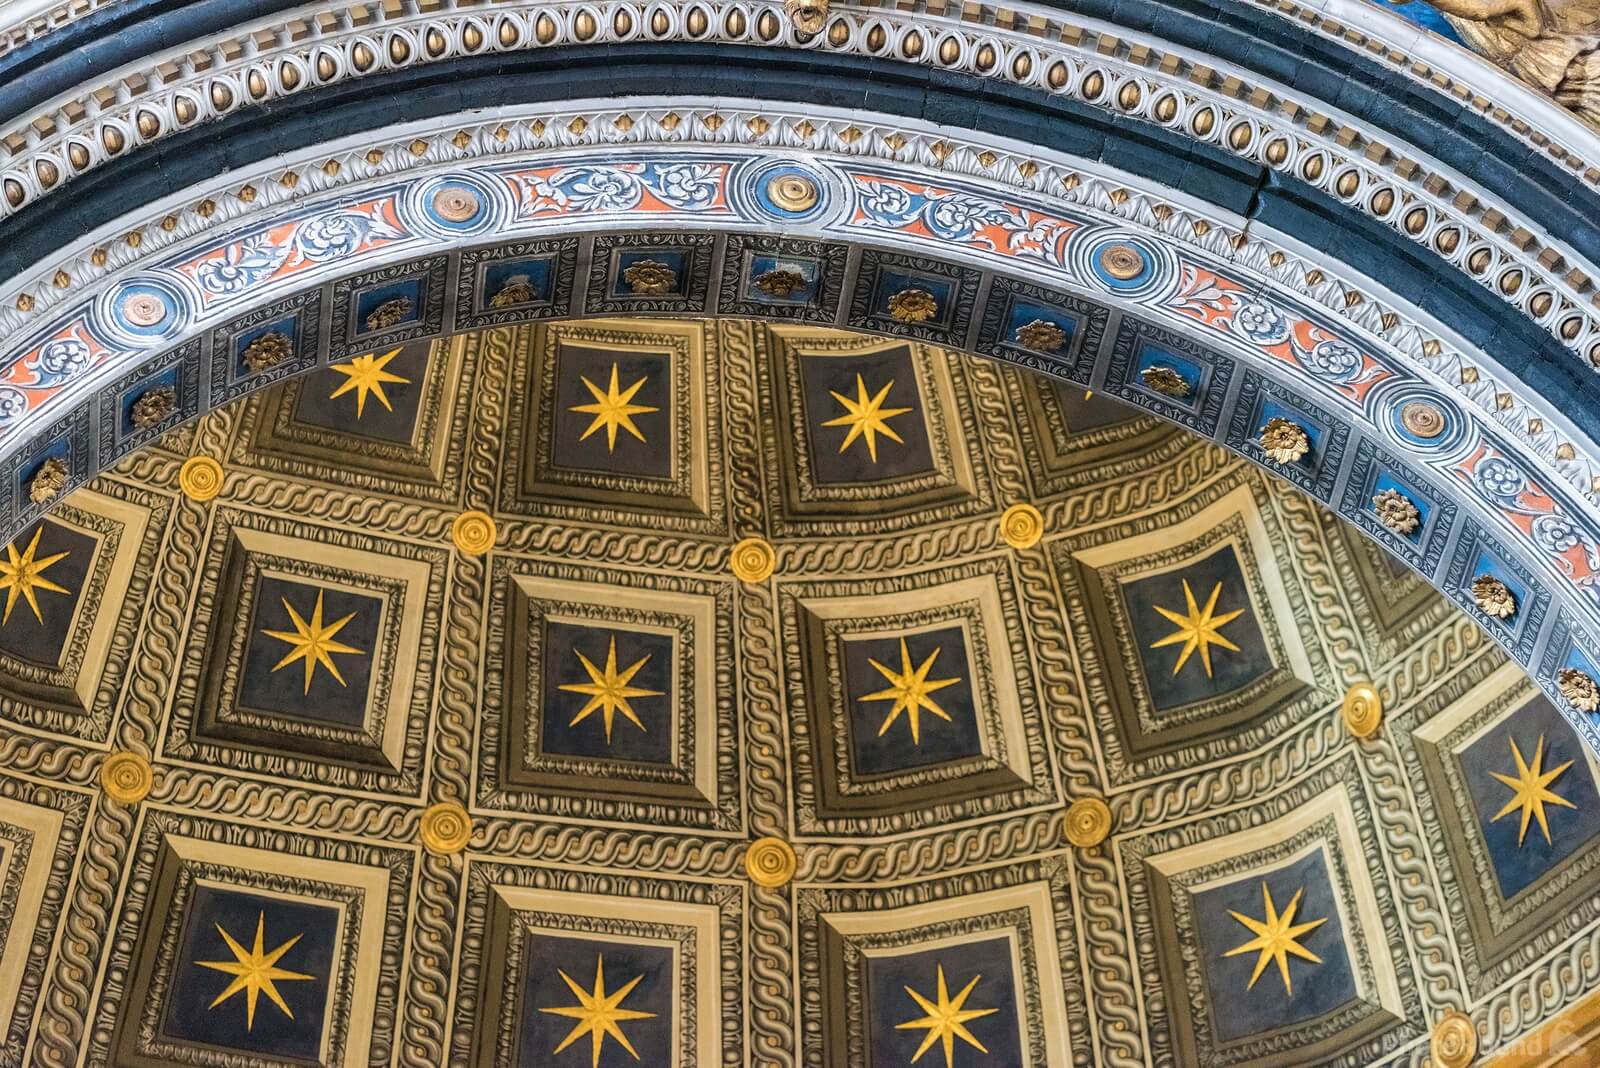 Image of The Siena Cathedral Interior by Luka Esenko